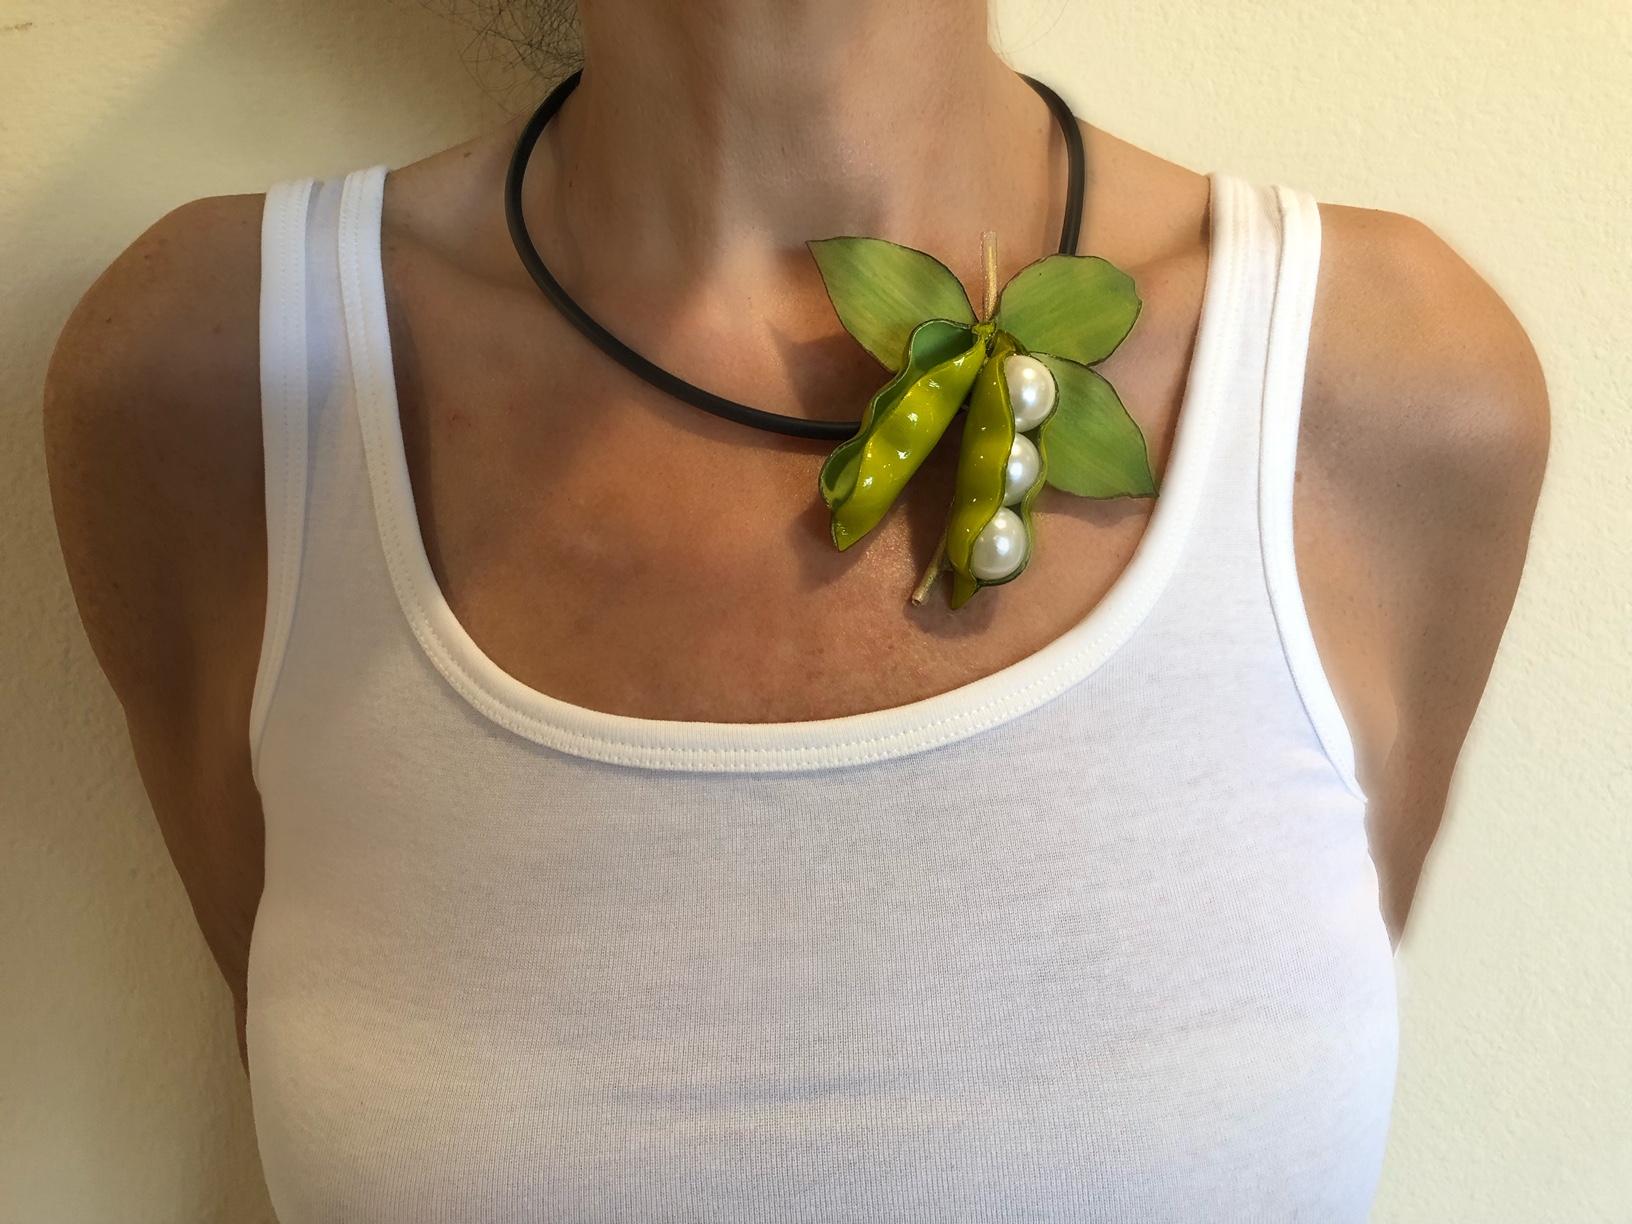 Light and easy to wear, this handmade artisanal necklace/pin was made in Paris by Cilea. The lightweight pin features two pea-pods. The pins three-dimensional oversized figure features bright colors, hand manipulated details and creamy faux pearls.